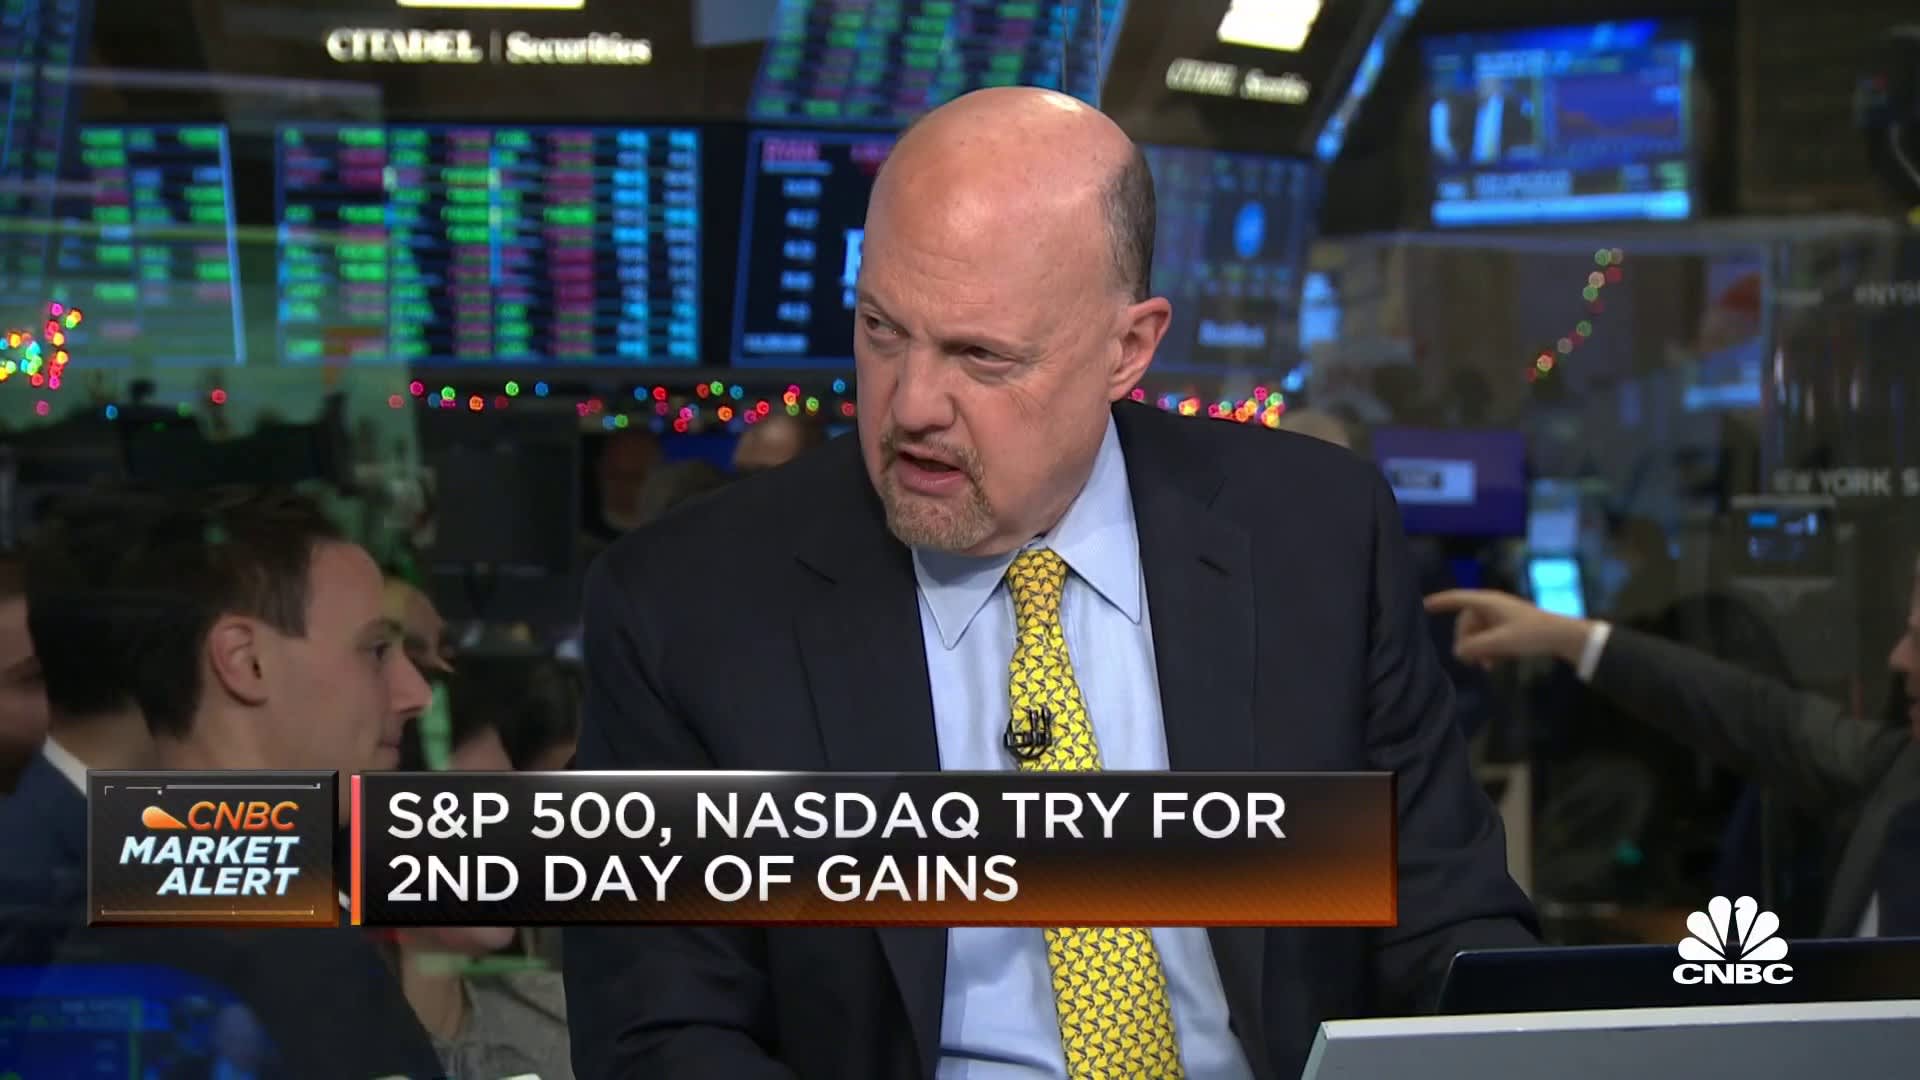 Etsy could be that rare tech company to make a comeback, says Jim Cramer